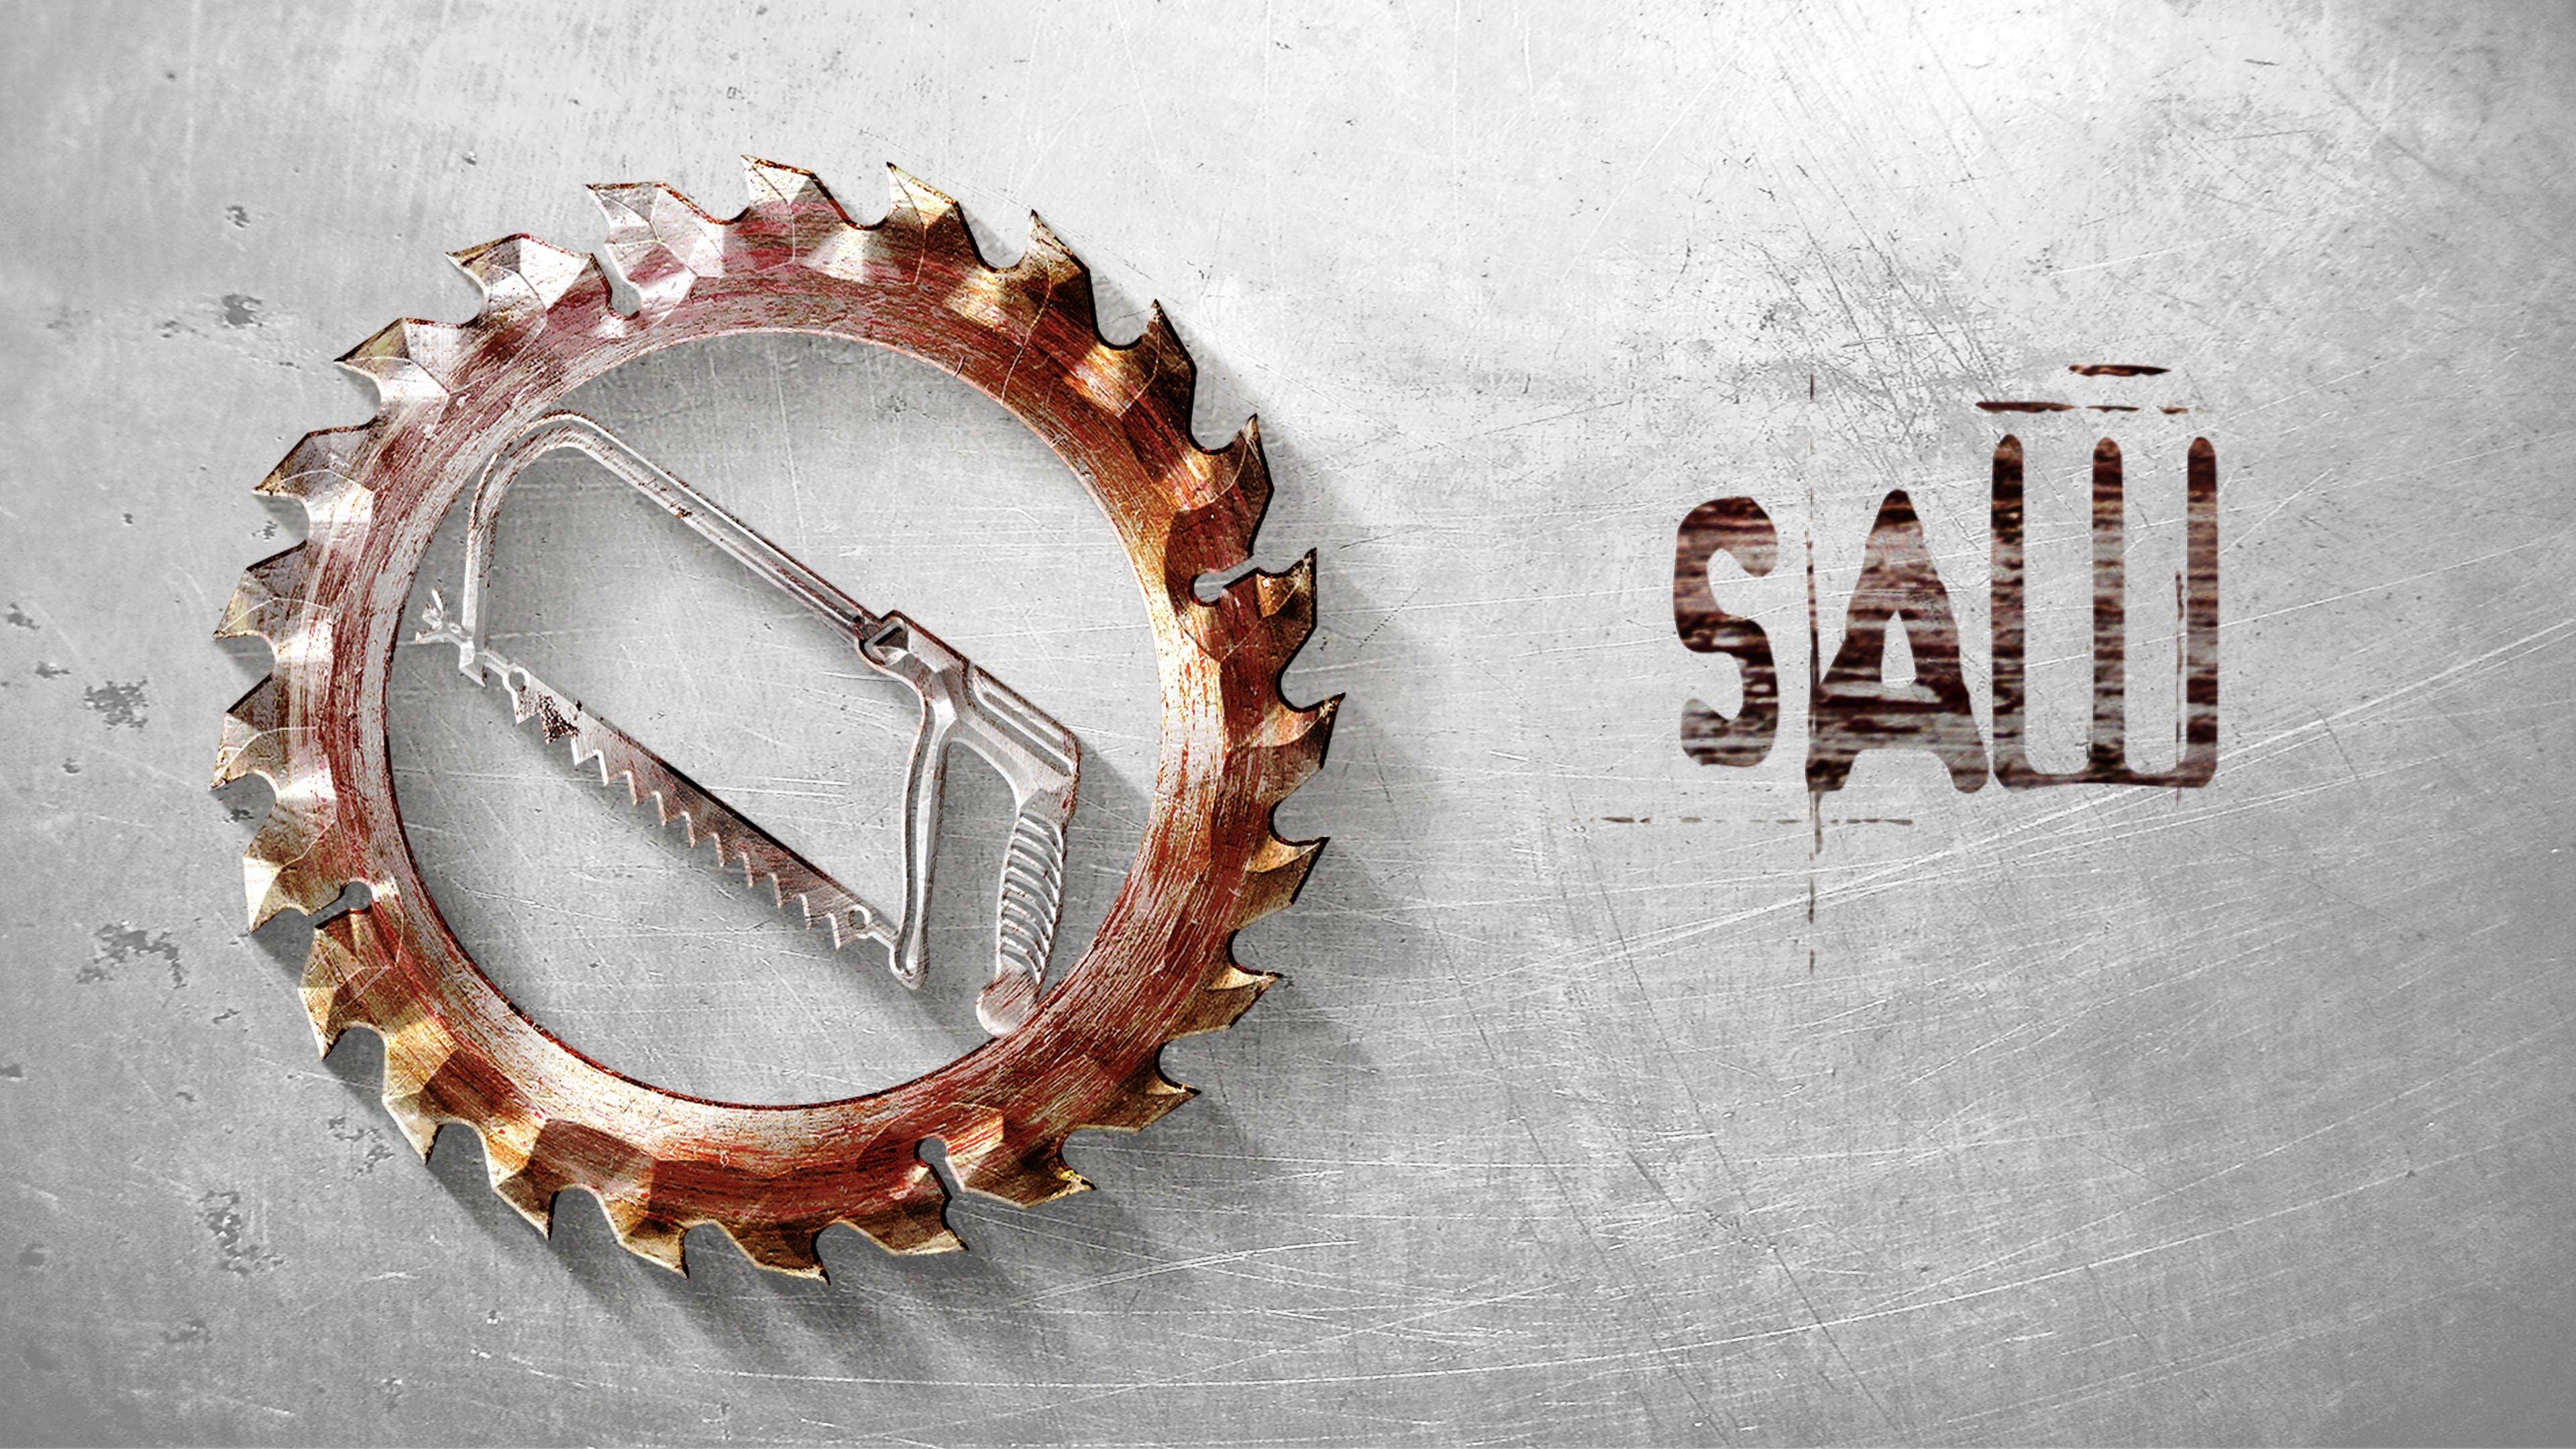 Watch Saw Streaming Online on Philo (Free Trial)